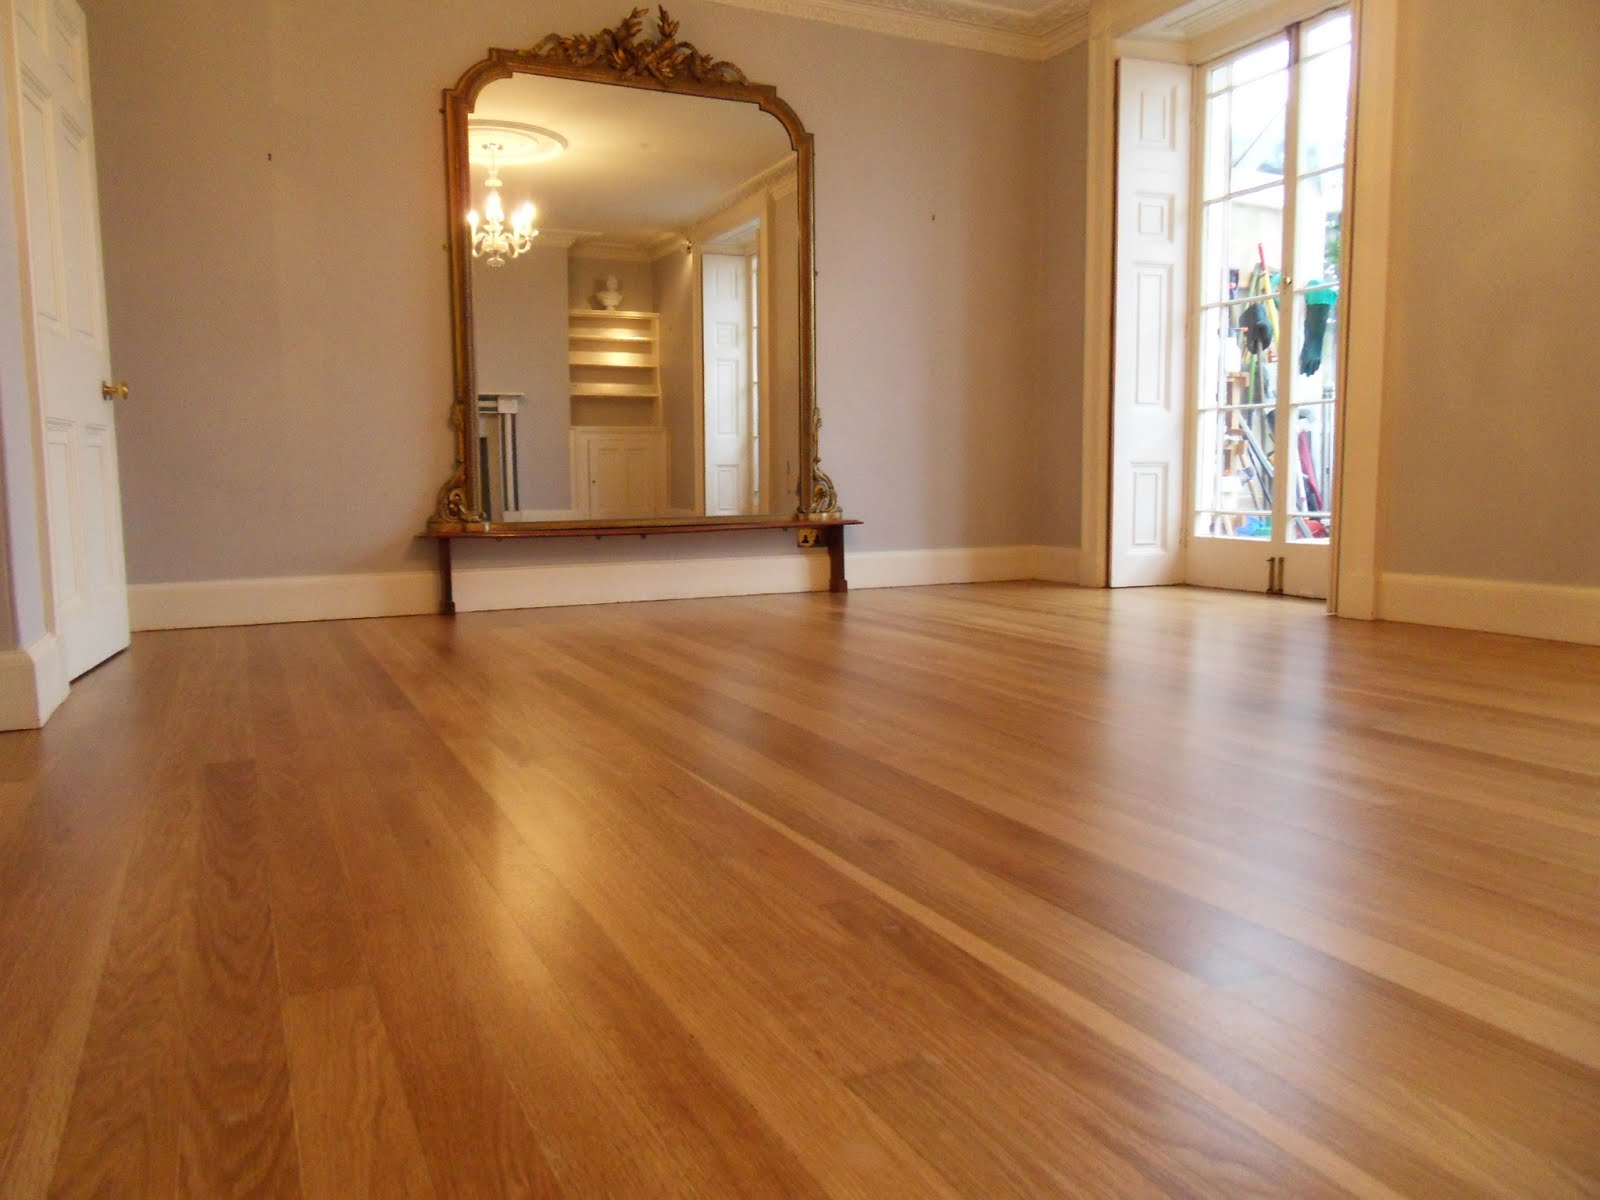 Can You Sand Bamboo Floors? A How-To Guide for Beginners